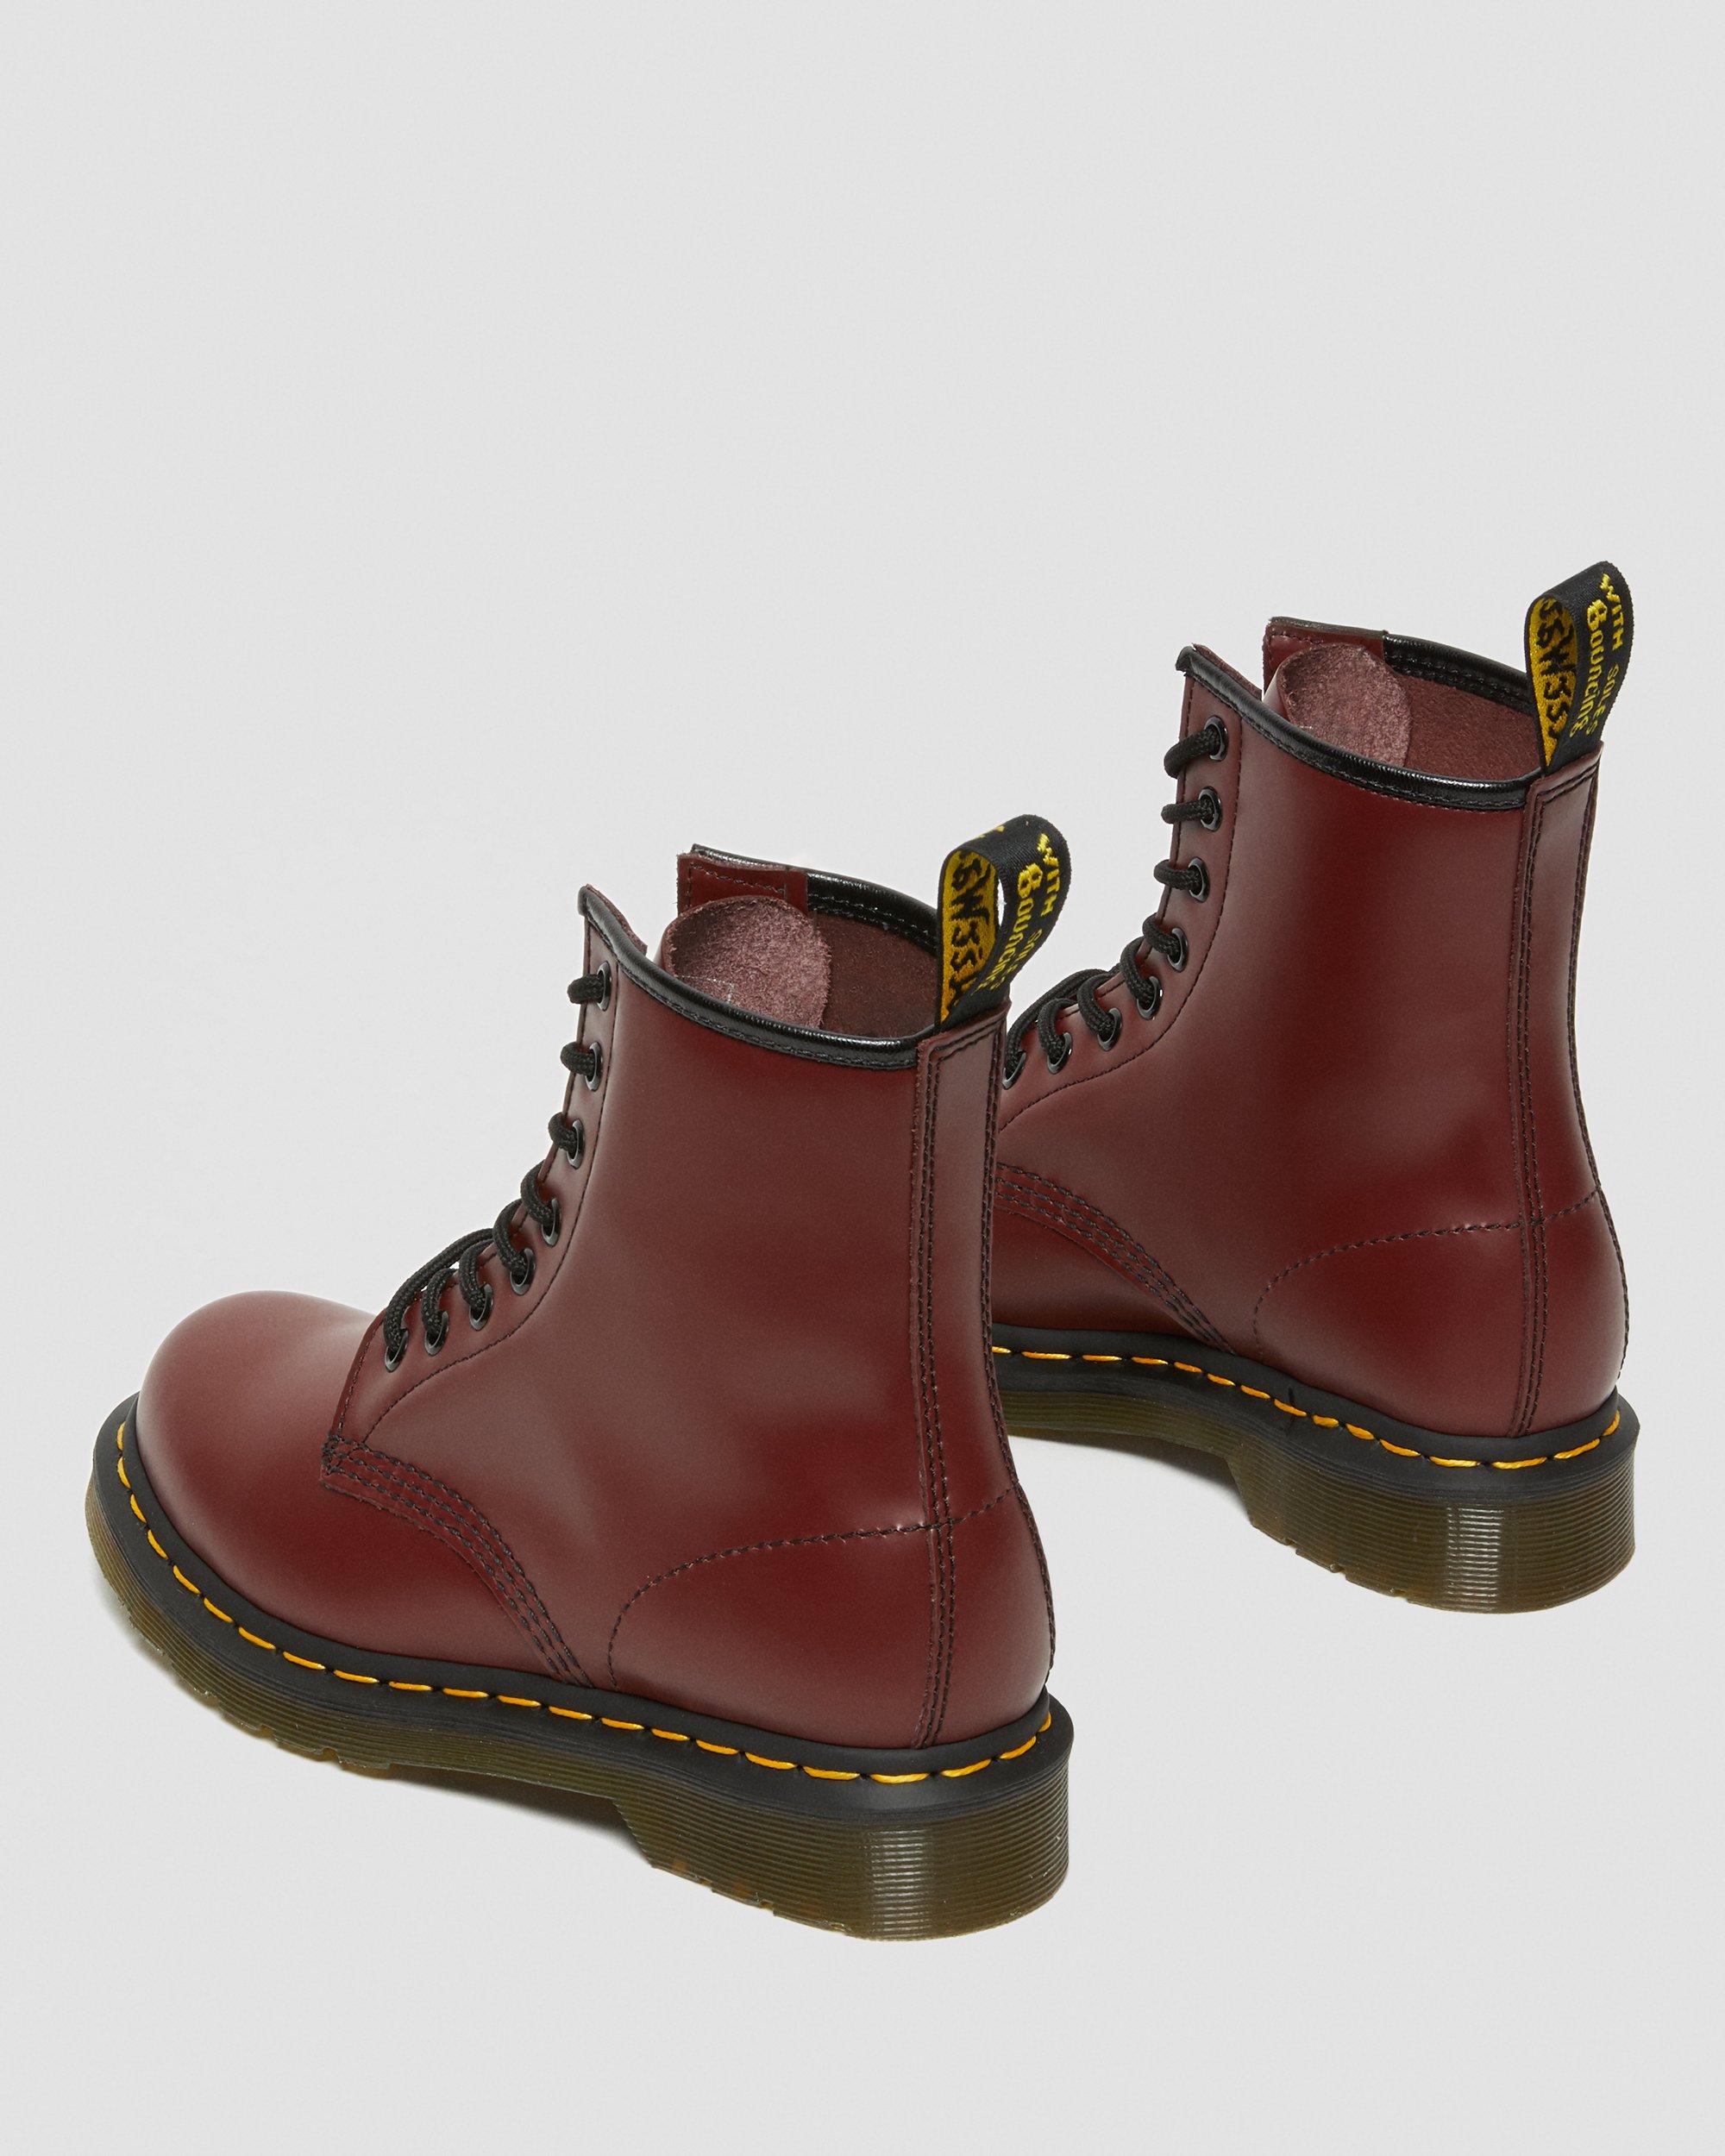 Voorzichtig Fonkeling Zuinig 1460 Women's Smooth Leather Lace Up Boots | Dr. Martens